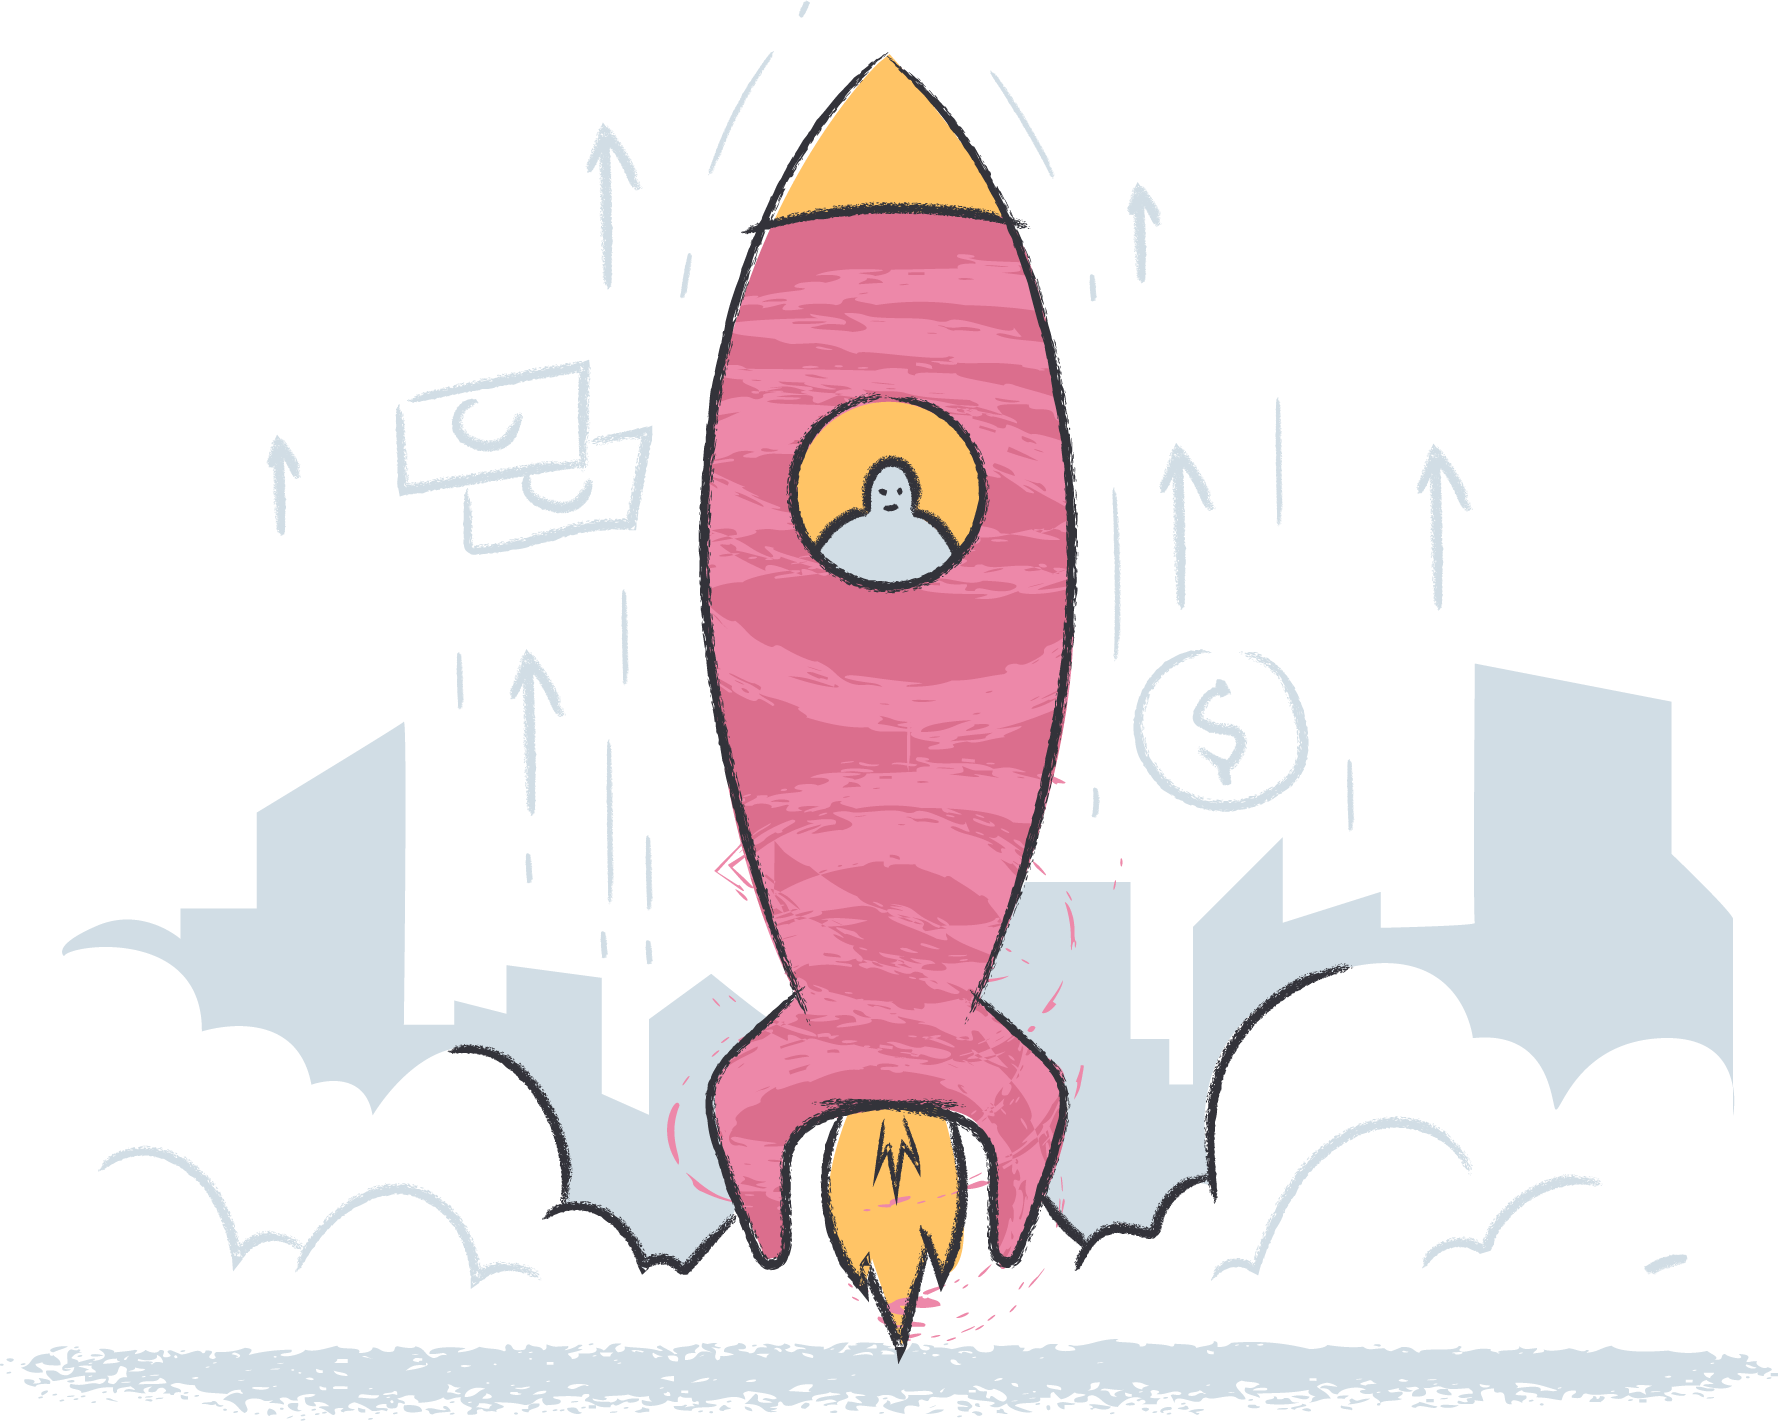 startup, start up, business, launch, rocket@2x.png